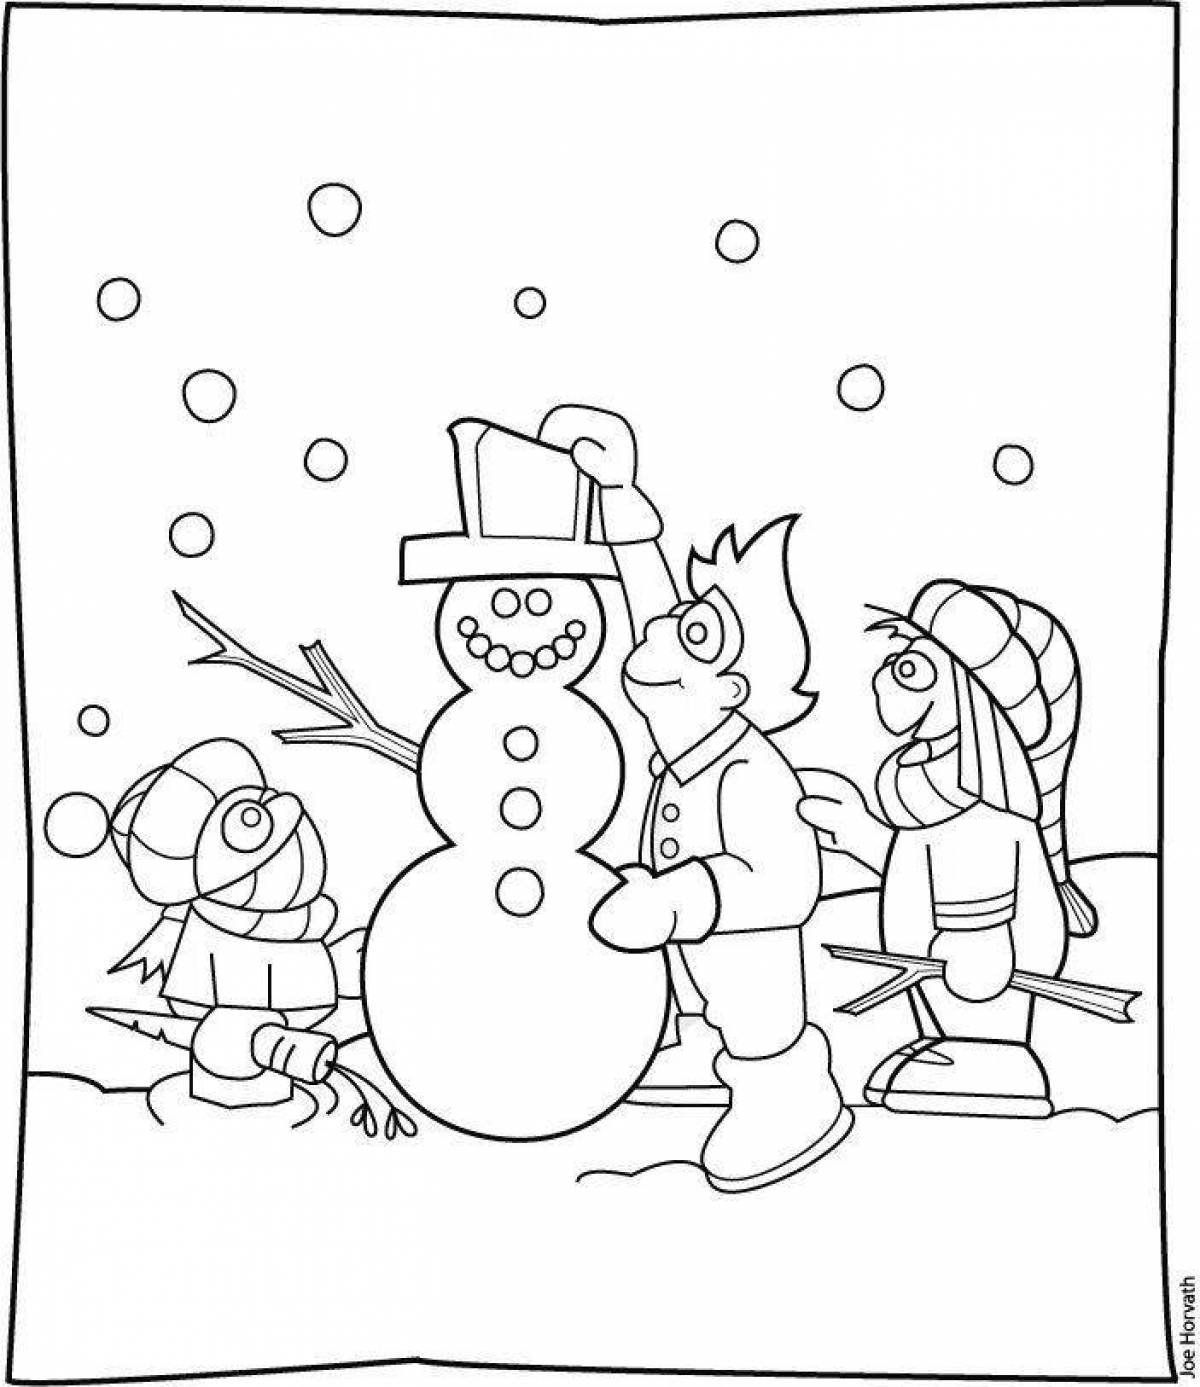 Naughty snowman coloring page